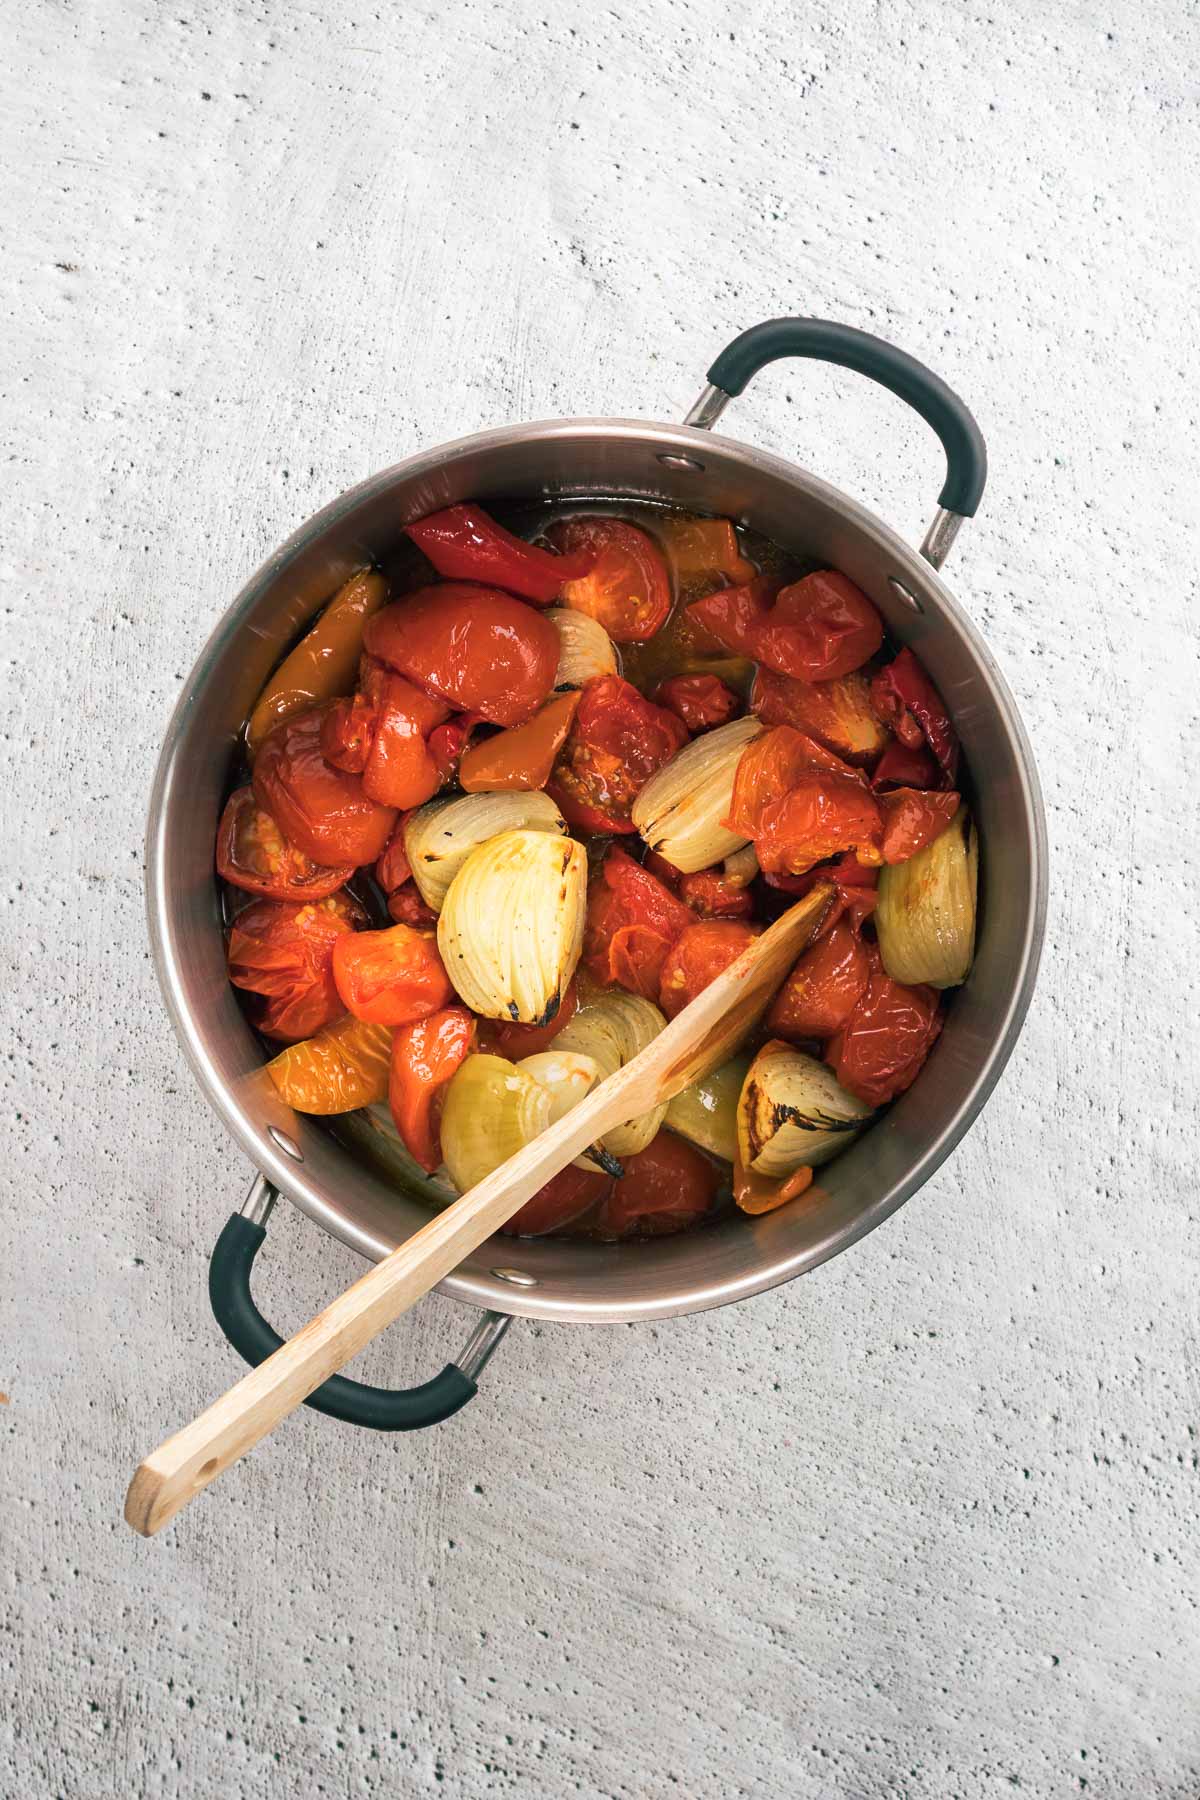 Roasted vegetables in a large pot.